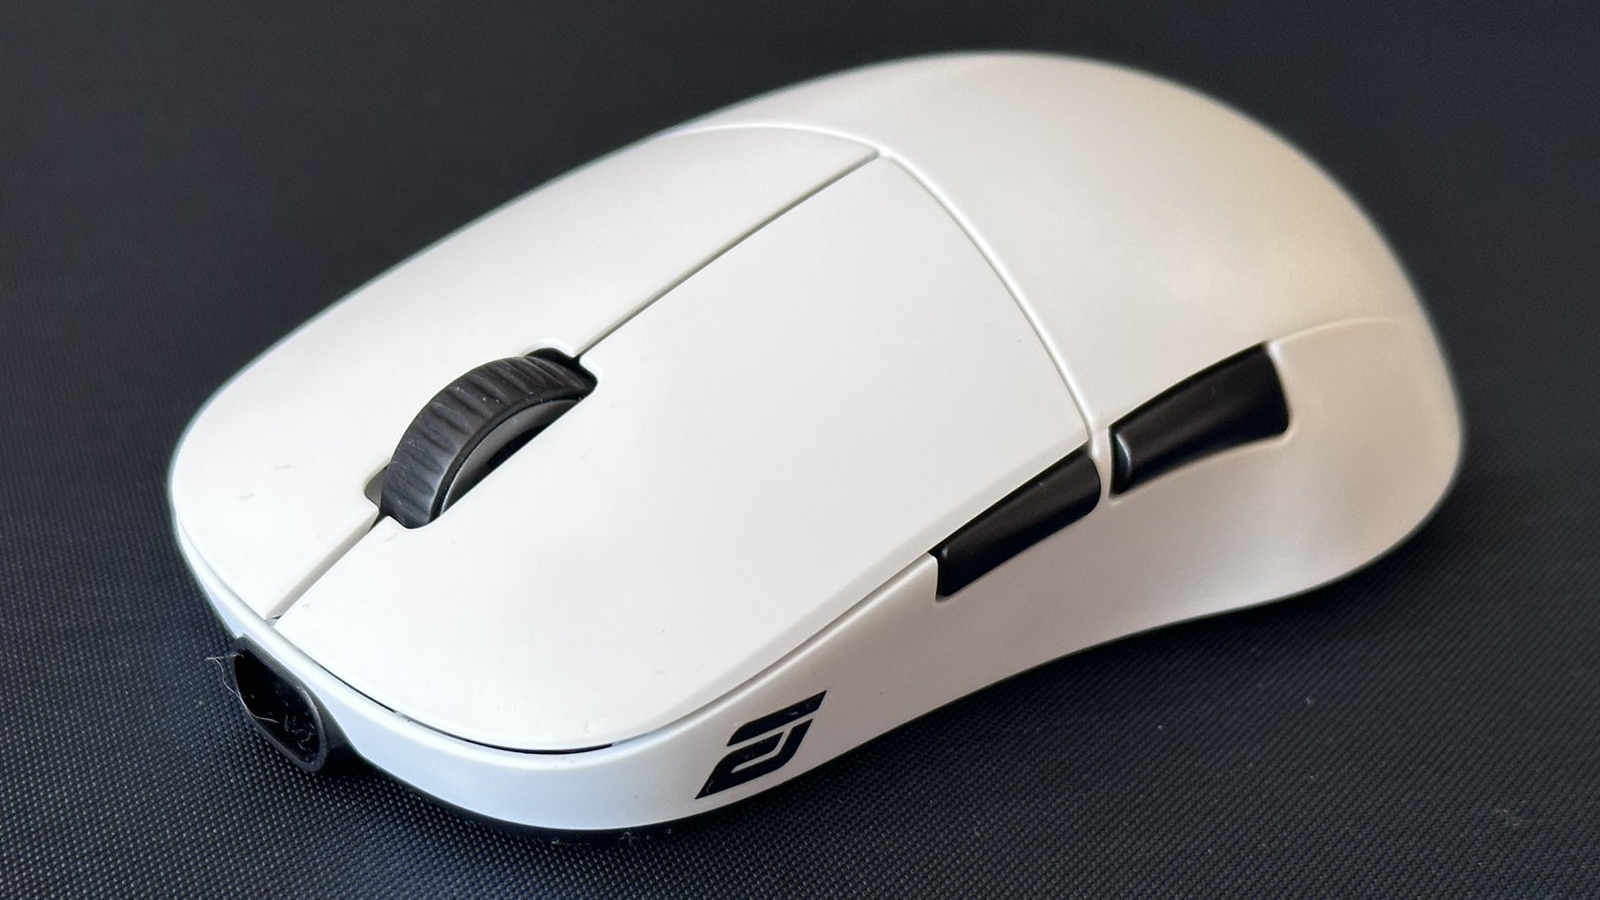 Endgame's XM2we wireless gaming mouse review - Neowin